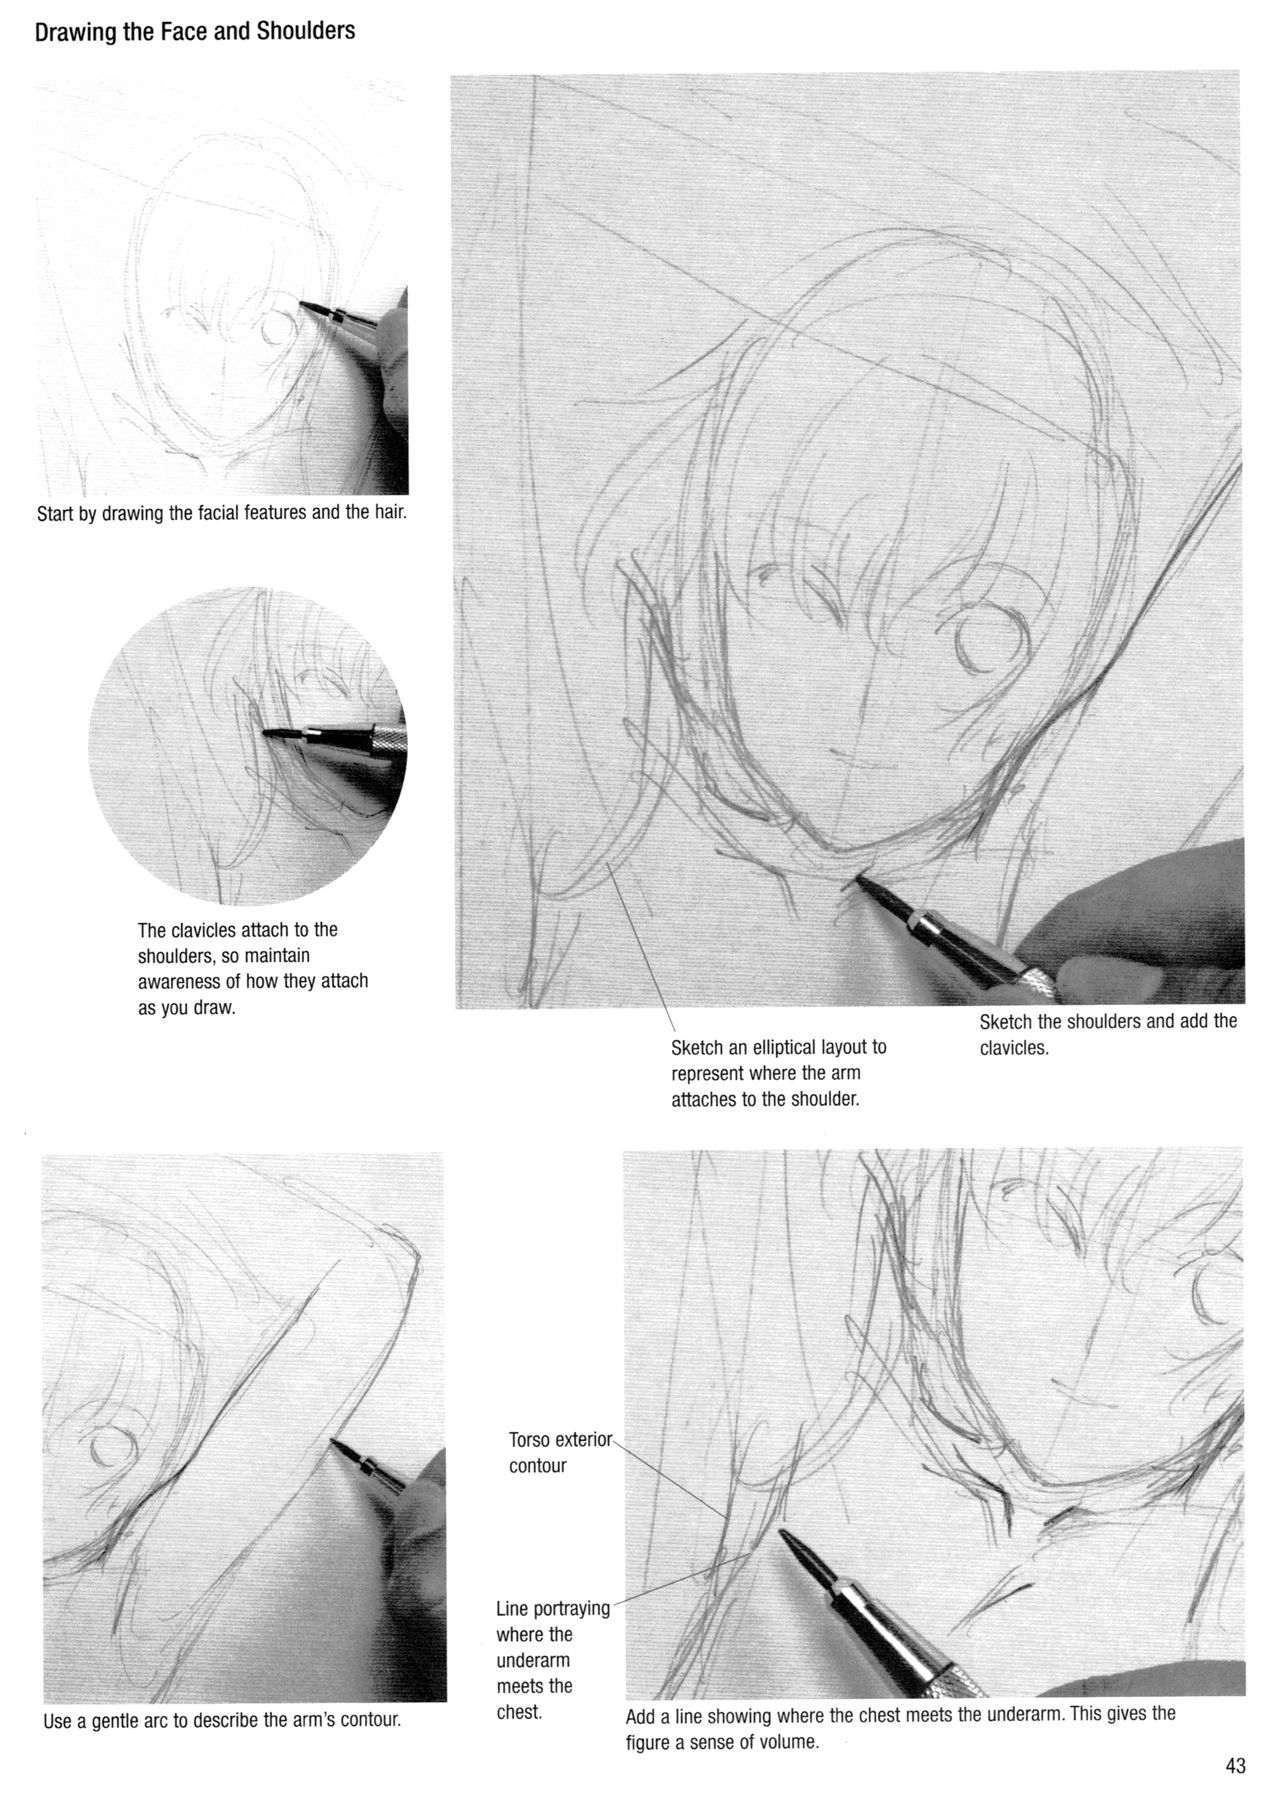 Sketching Manga-Style Vol. 3 - Unforgettable Characters 42